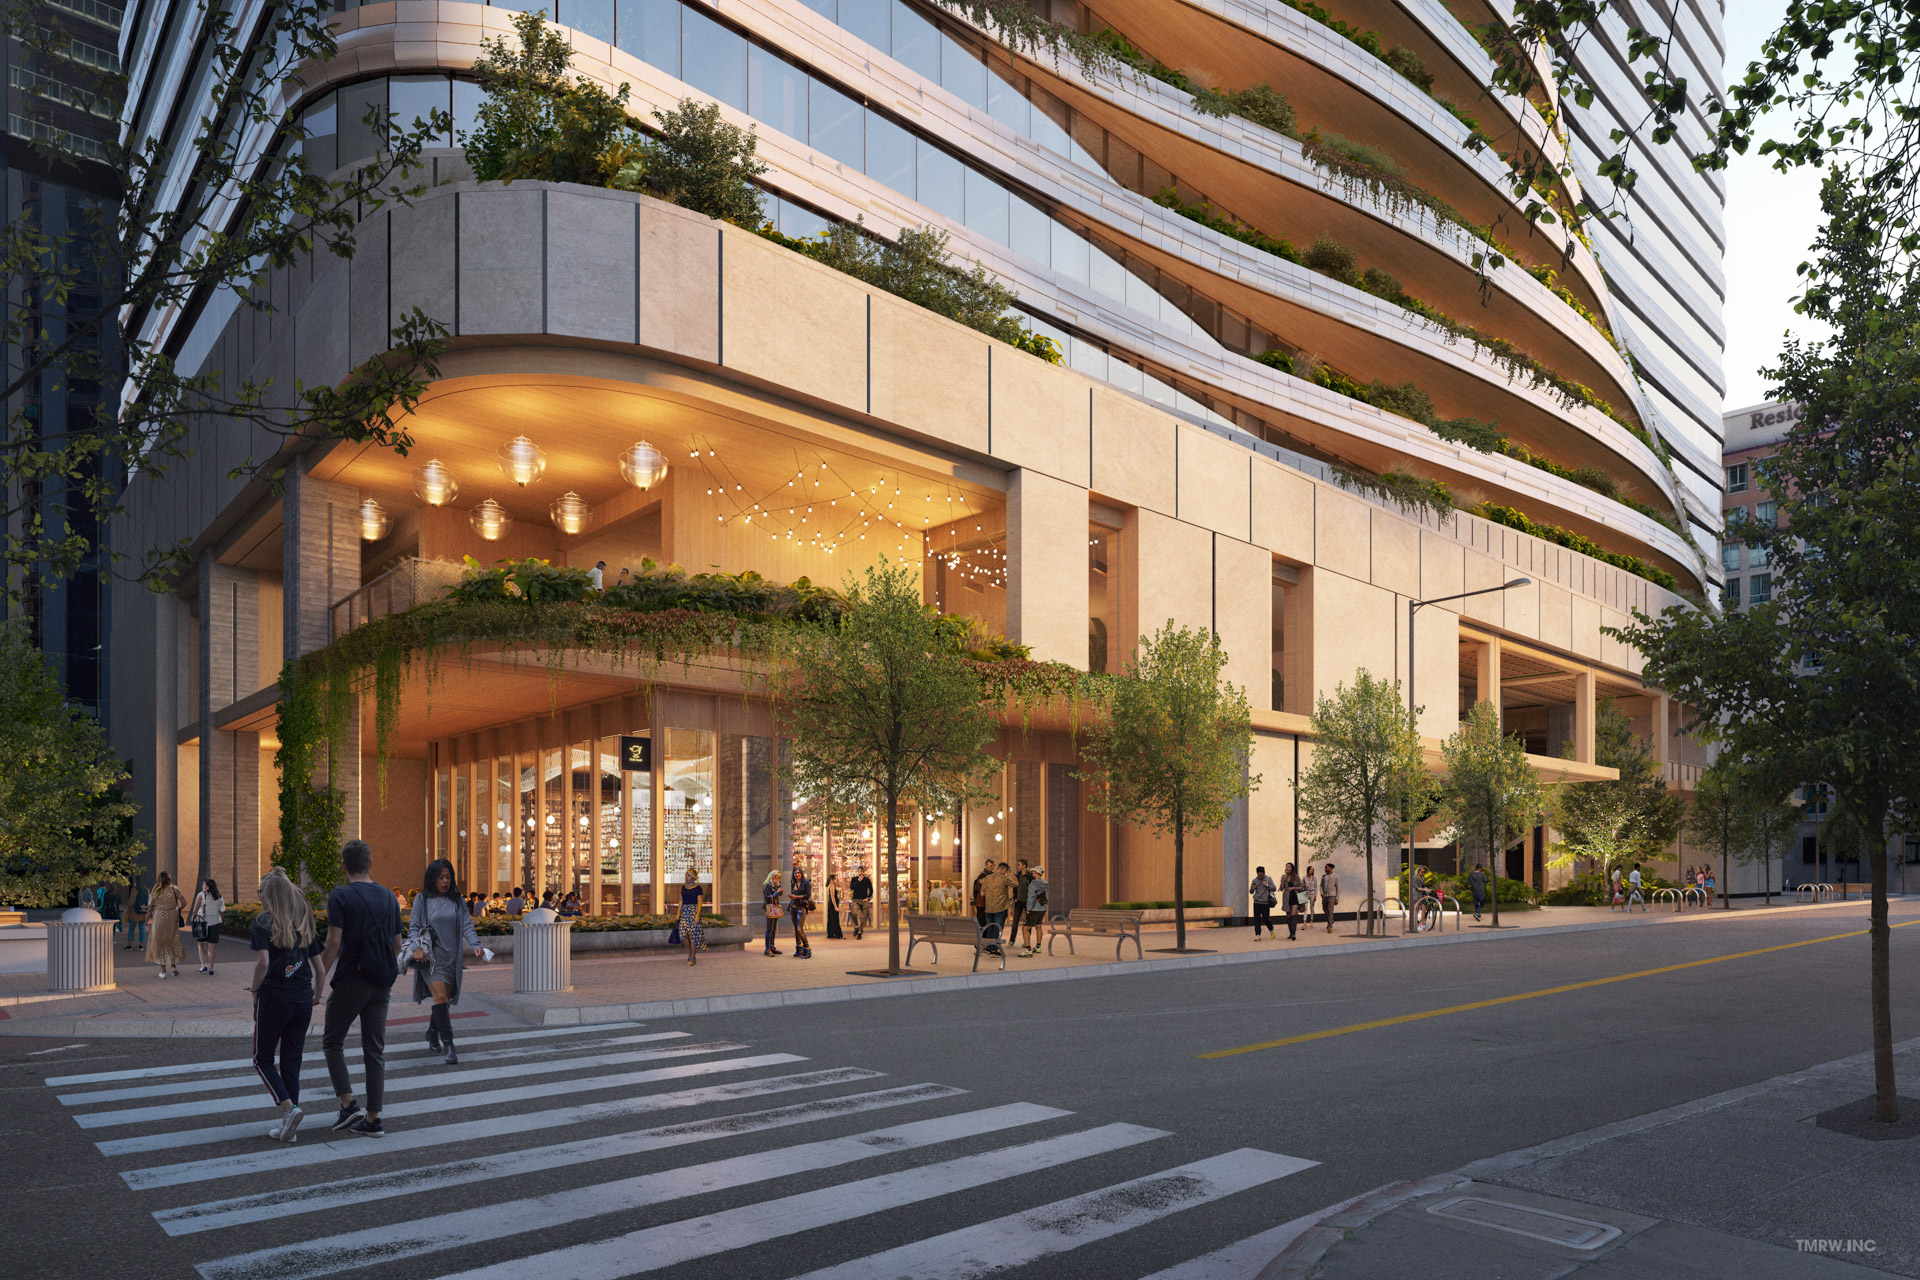 Architectural visualization of The Perennial for Cielo Property Group. A image of the exterior of a office building in daylight from street view with people walking the streets in front of.